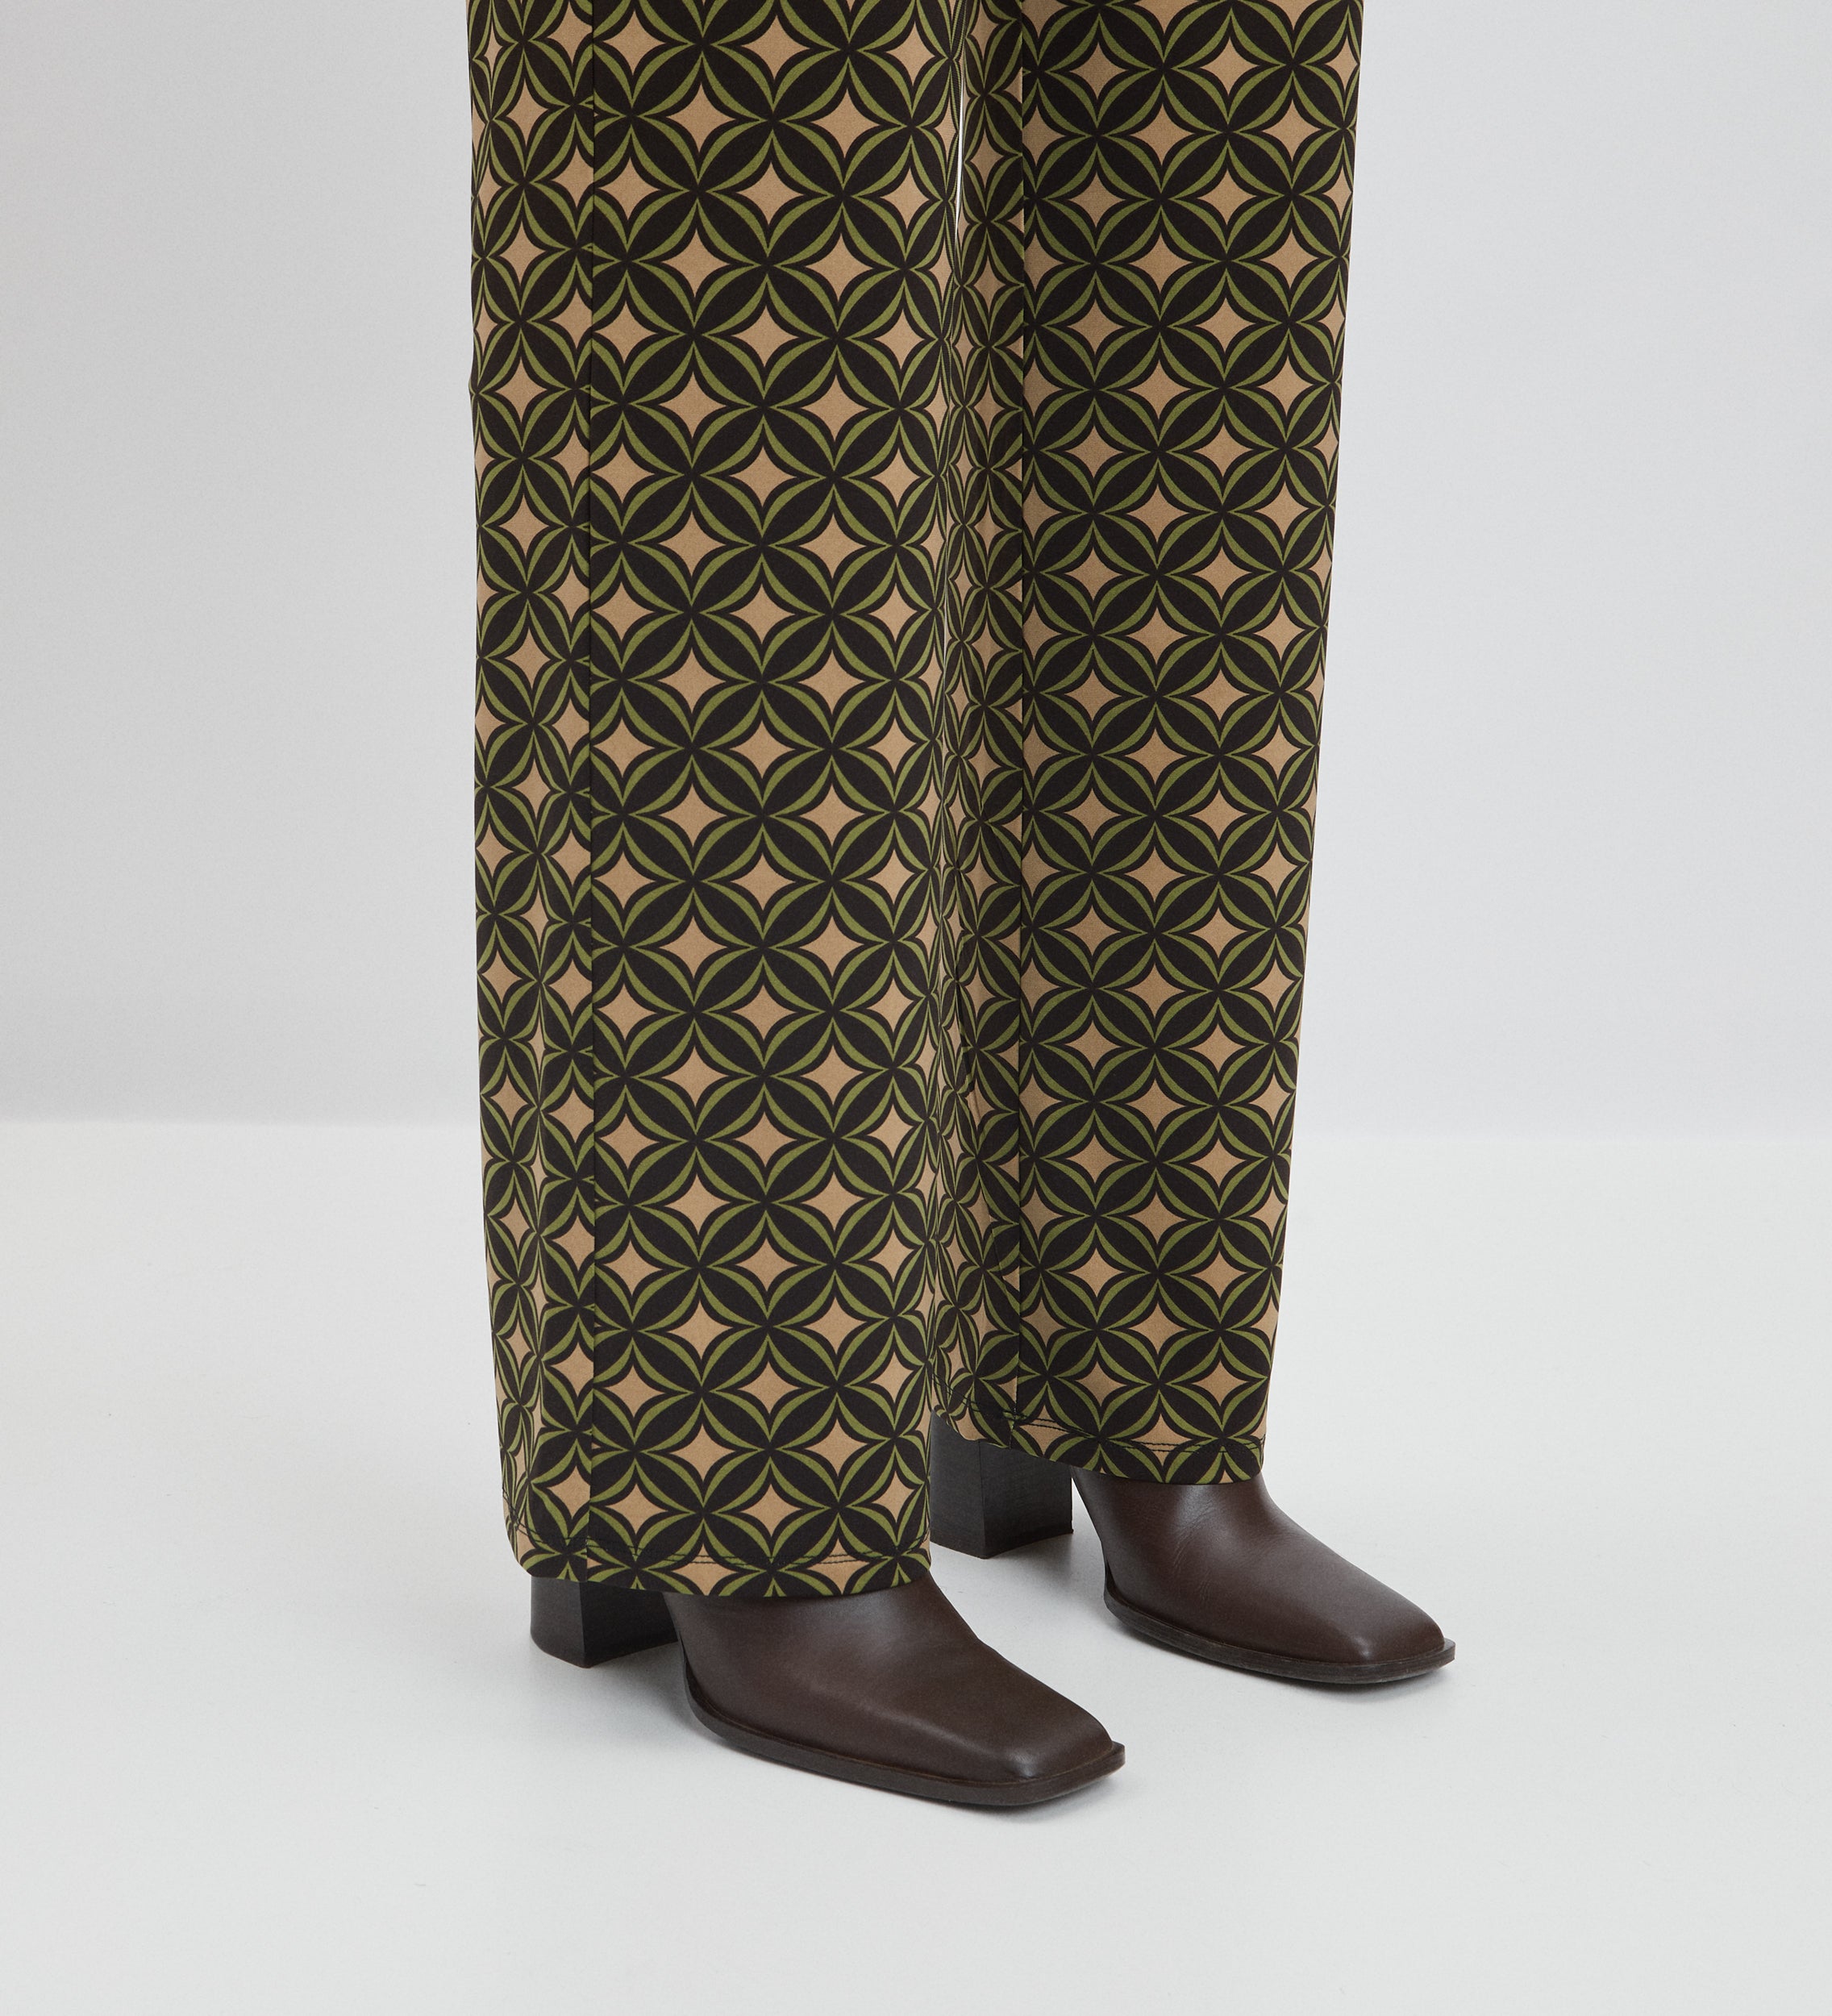 Straight patterned knit trousers